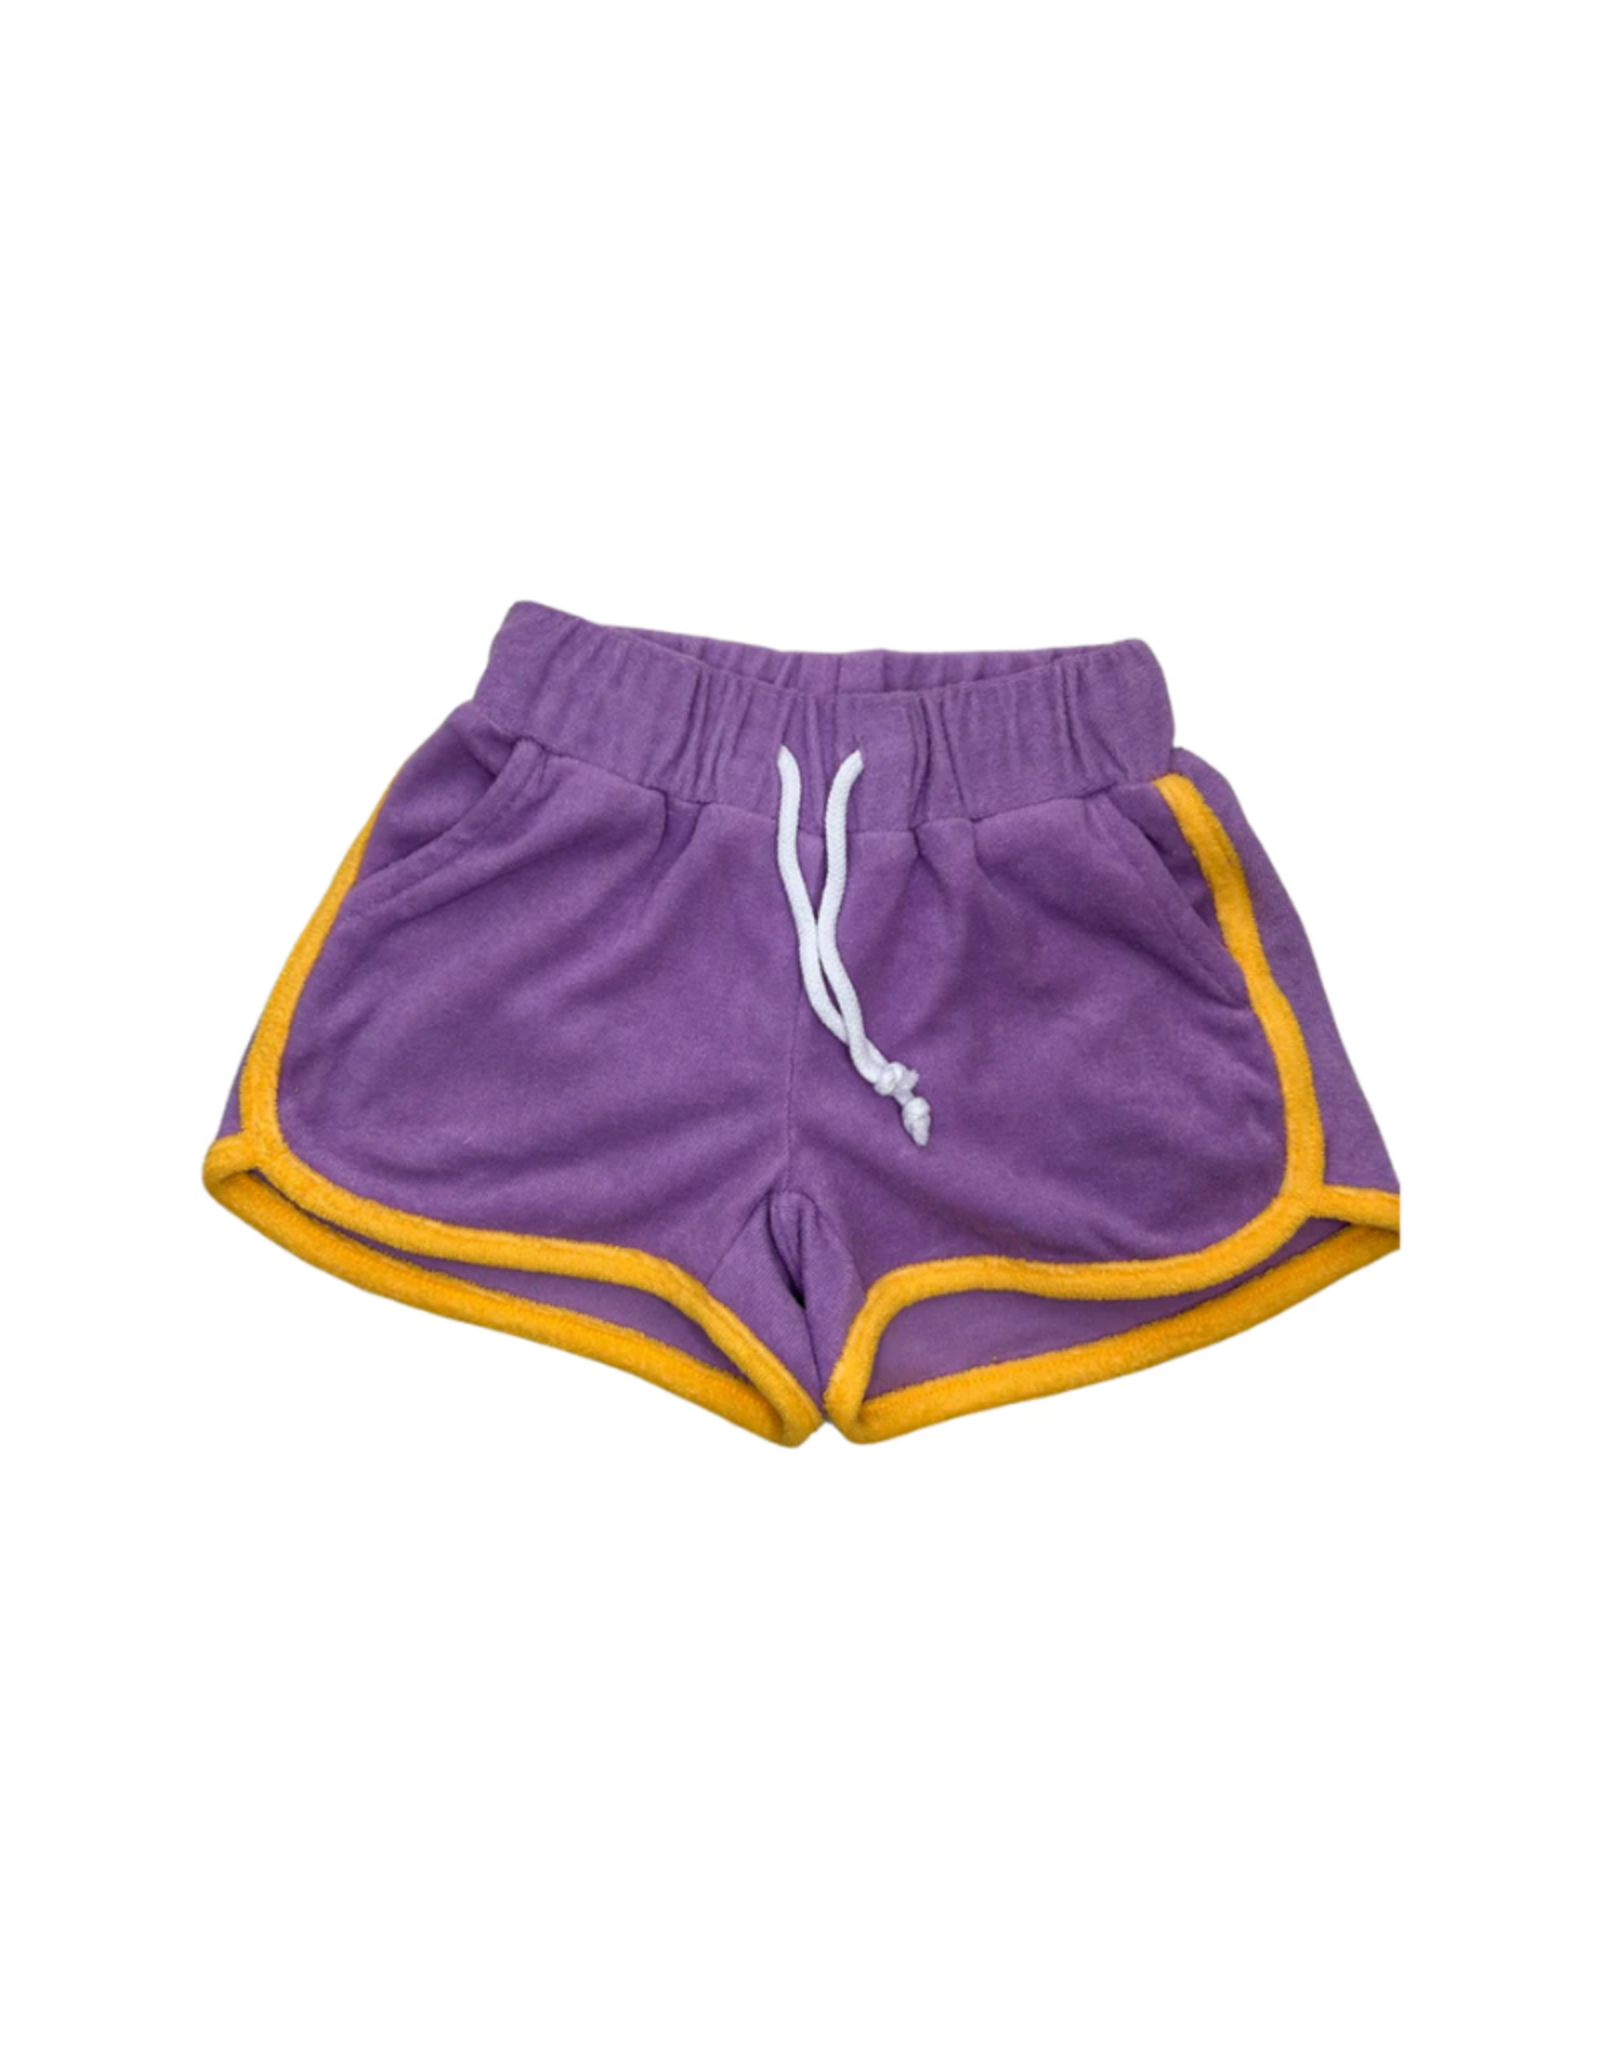 Purple/Gold Terry Cheer Shorts